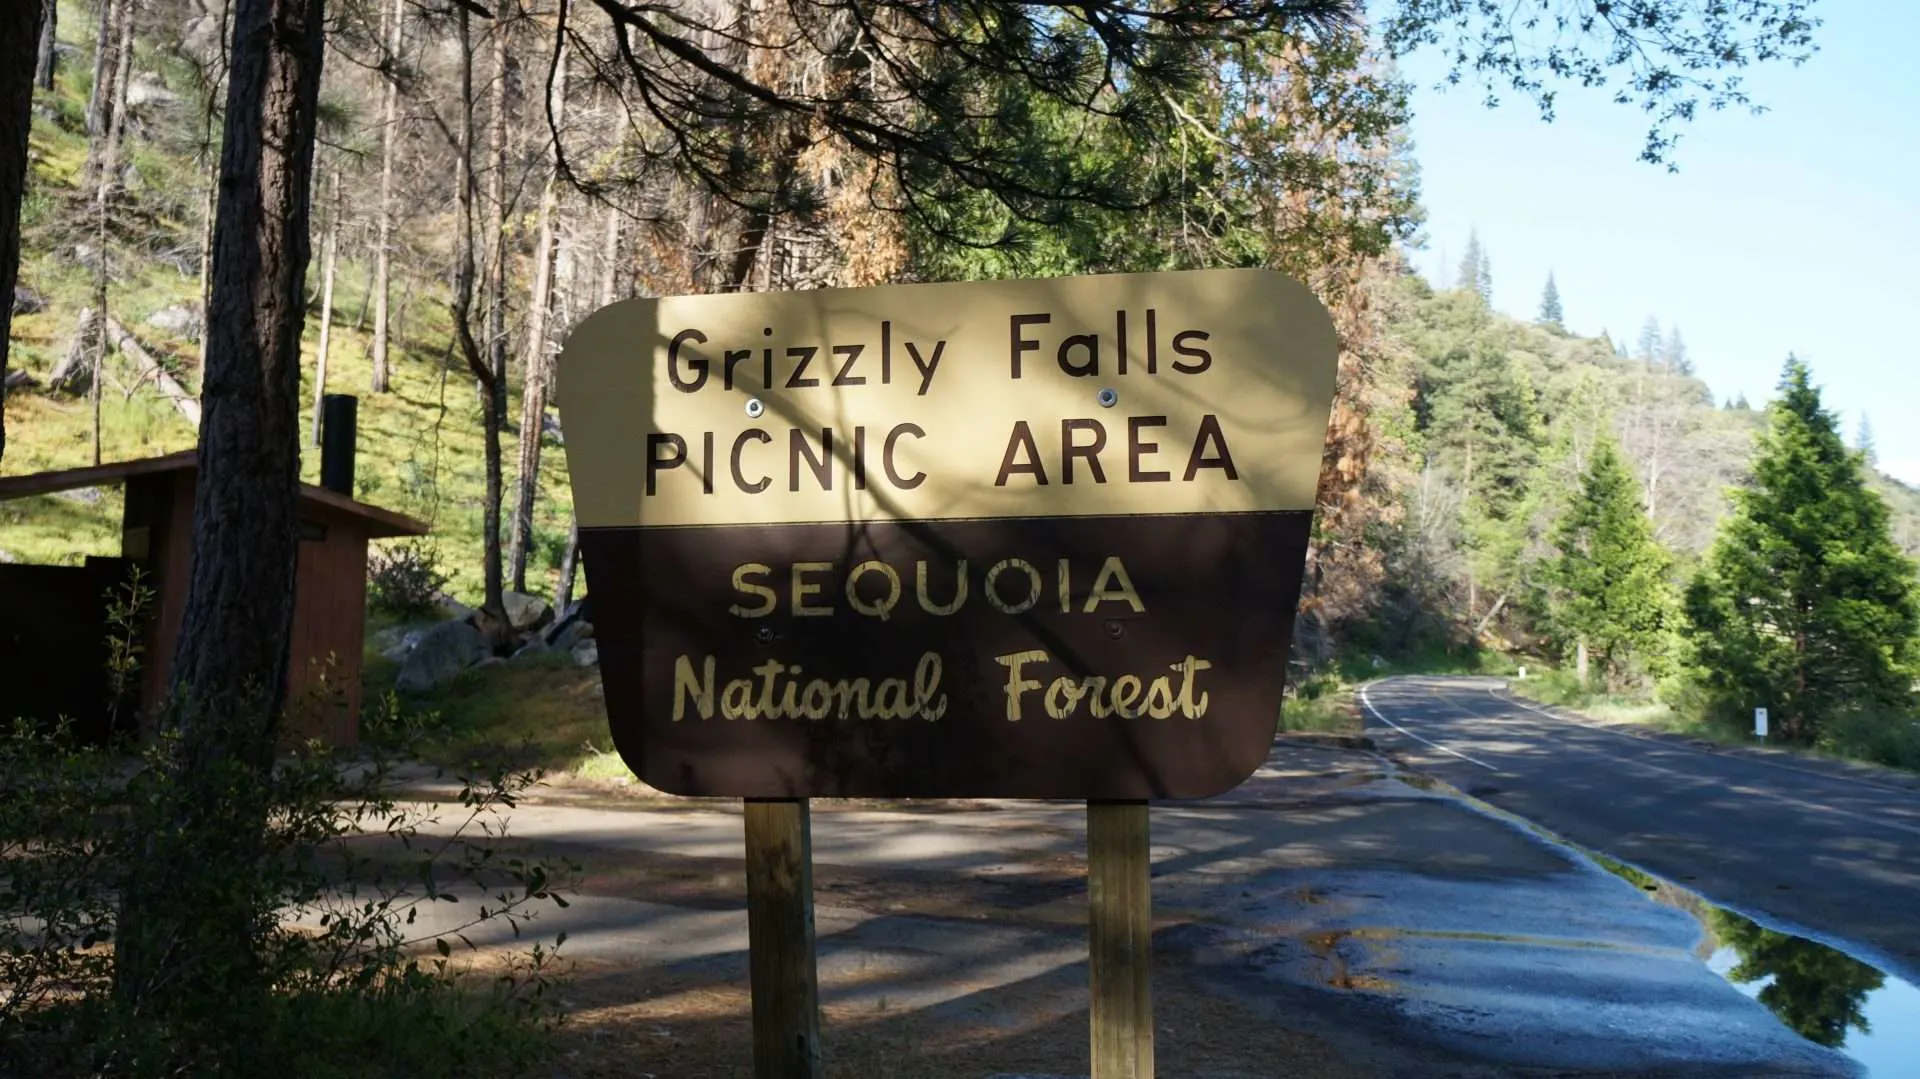 Sequoia National Forest entry sign